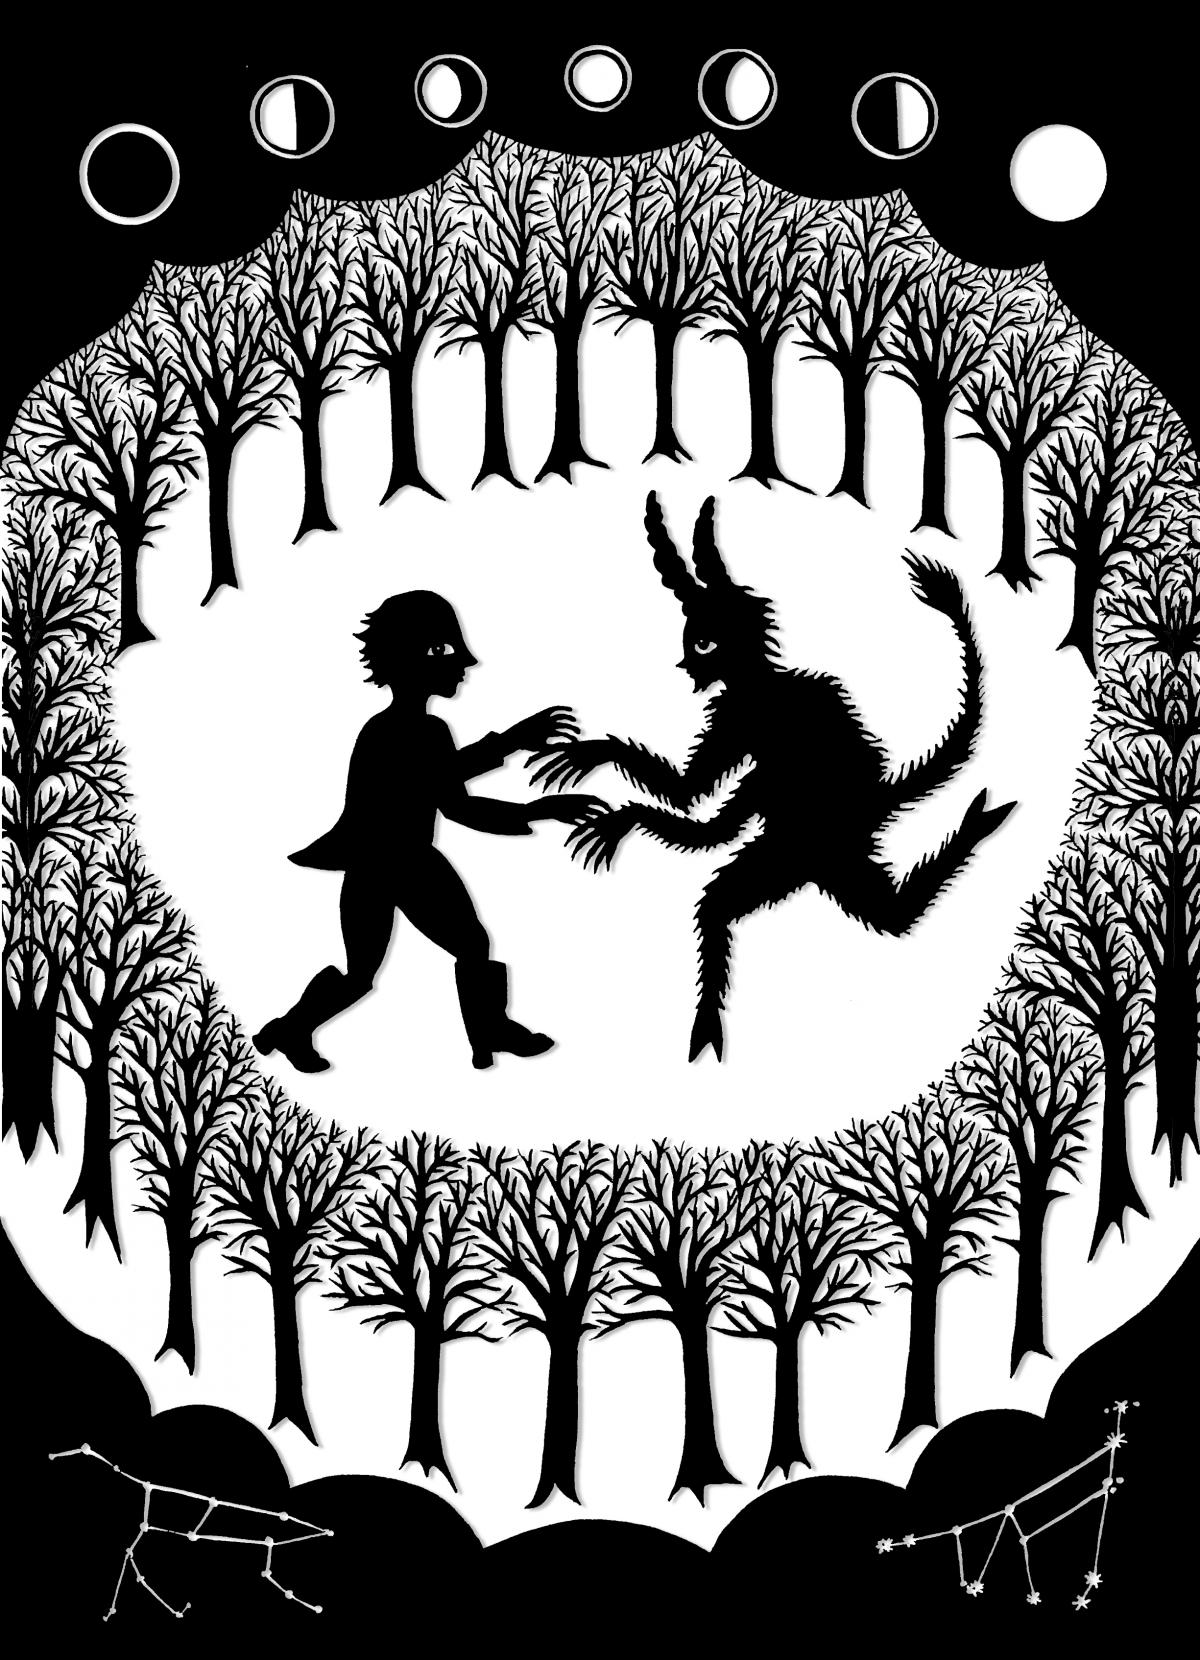 Illustration of a man dancing with the devil